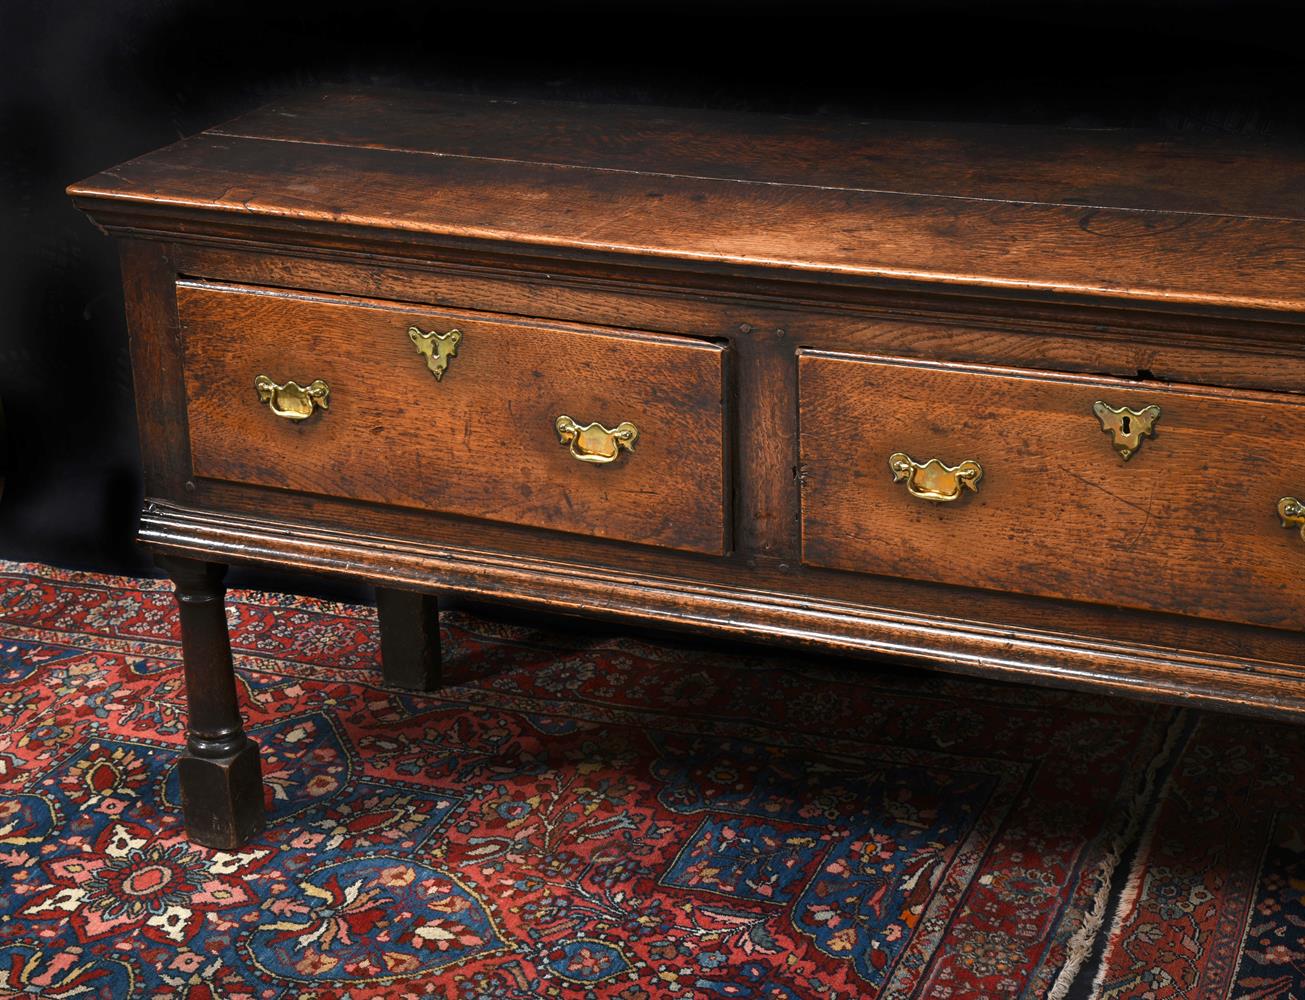 AN OAK DRESSER BASE, LATE 17TH OR EARLY 18TH CENTURY - Image 2 of 2